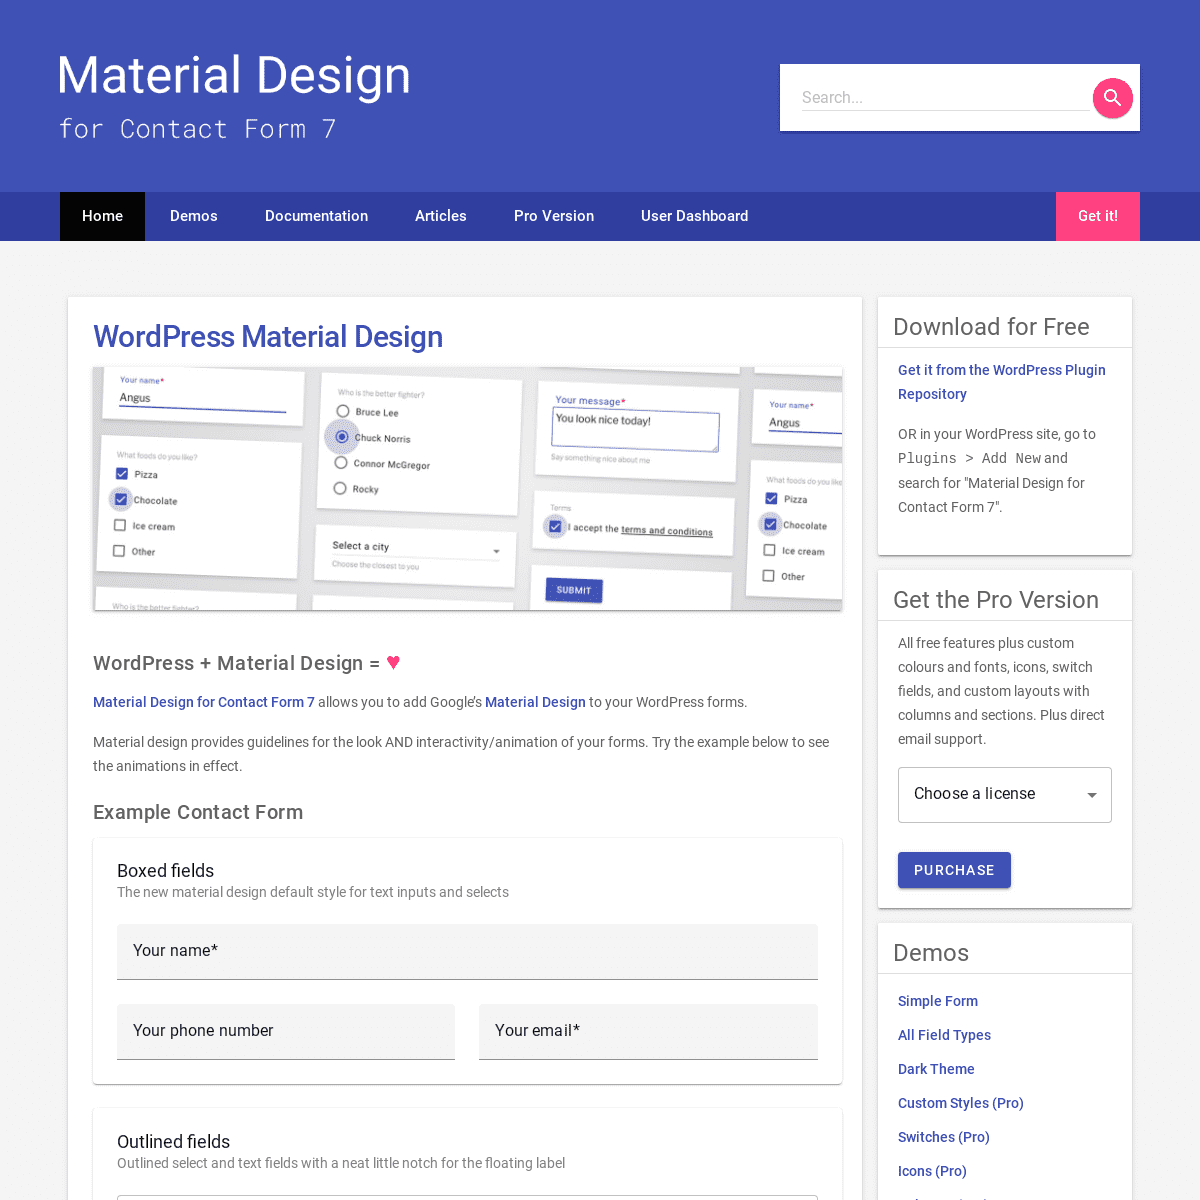 WordPress Material Design - Material Design for Contact Form 7